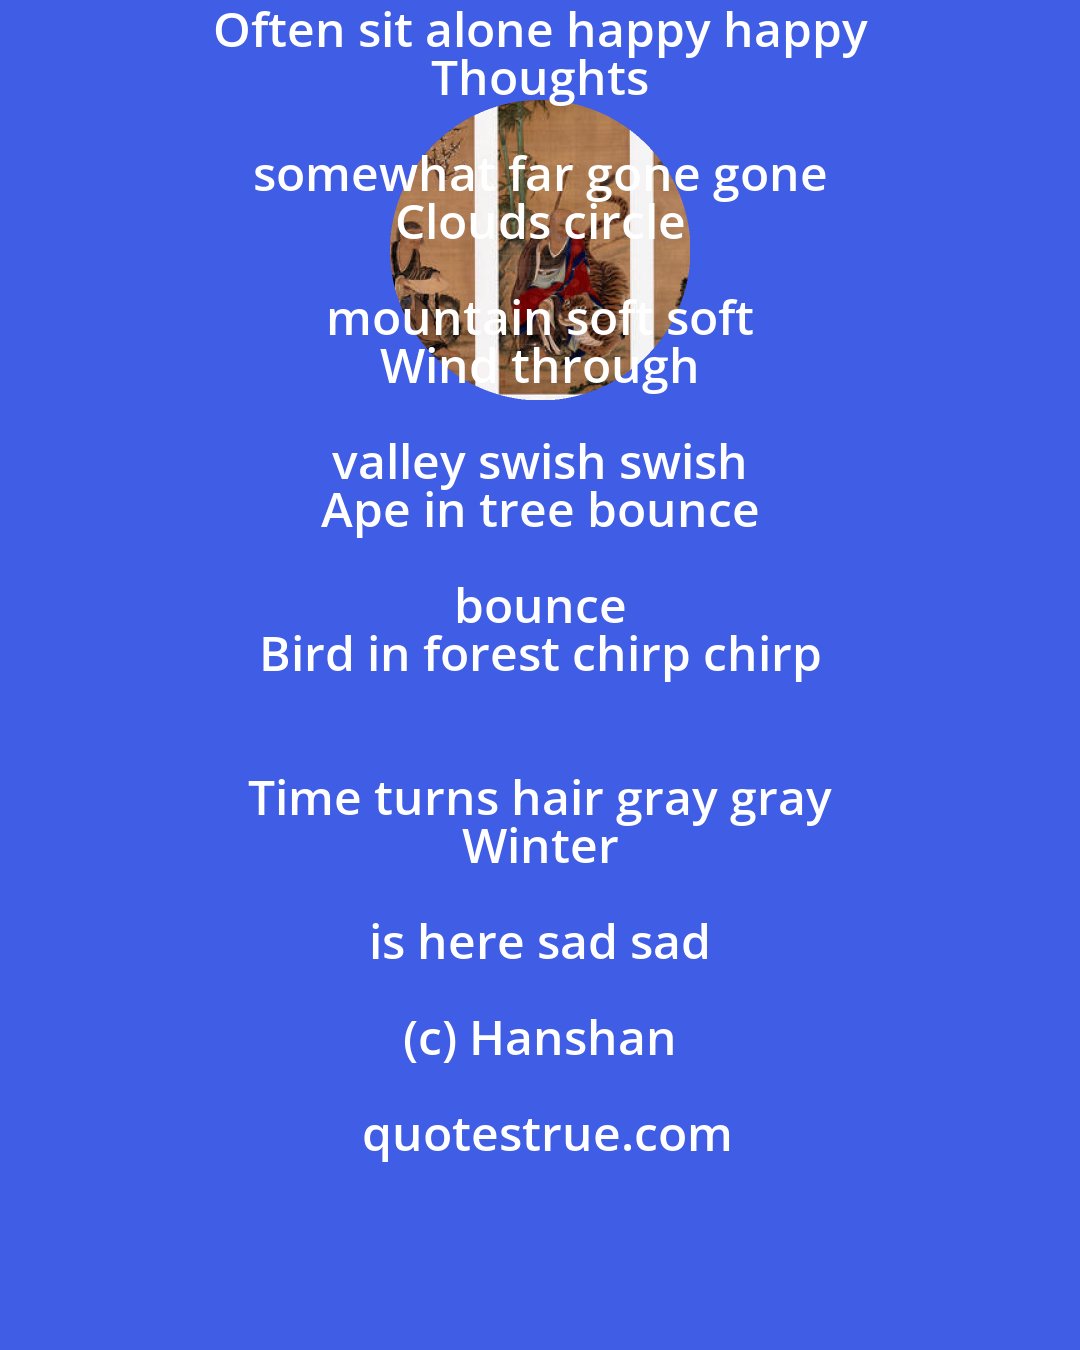 Hanshan: Often sit alone happy happy 
 Thoughts somewhat far gone gone 
 Clouds circle mountain soft soft 
 Wind through valley swish swish 
 Ape in tree bounce bounce 
 Bird in forest chirp chirp 
 Time turns hair gray gray 
 Winter is here sad sad